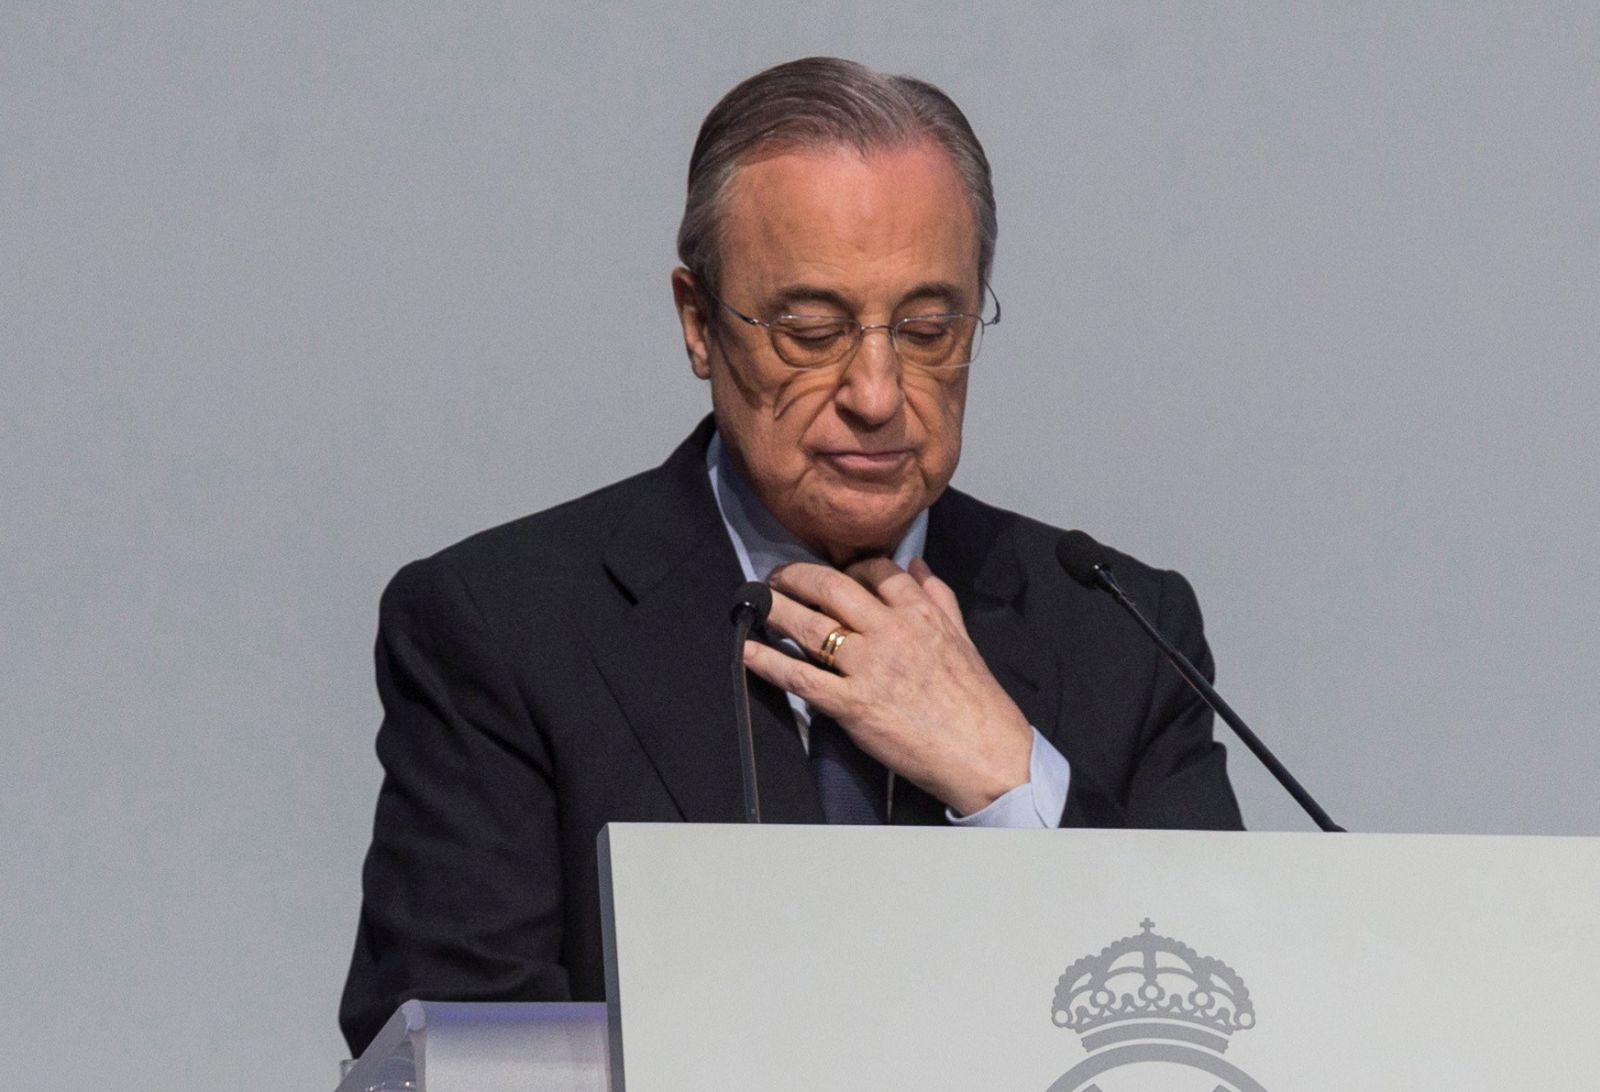 epa09144525 (FILE) - A file picture shows Real Madrid's president Florentino Perez delivering a speech during the event held to award members with 25, 50 and 60 years of membership at the IFEMA Trade Fair Center in Madrid, Spain, 03 November 2018 (reissued 19 April 2021). In the early hours of 19 April 2021 twelve European soccer clubs, AC Milan, Arsenal FC, Atletico de Madrid, Chelsea FC, FC Barcelona, FC Internazionale Milano, Juventus FC, Liverpool FC, Manchester City, Manchester United, Real Madrid CF and Tottenham Hotspur have announced the creation of a Super League. Florentino Prez will be the first chairman of the league.  EPA/Rodrigo Jimenez *** Local Caption *** 56800683